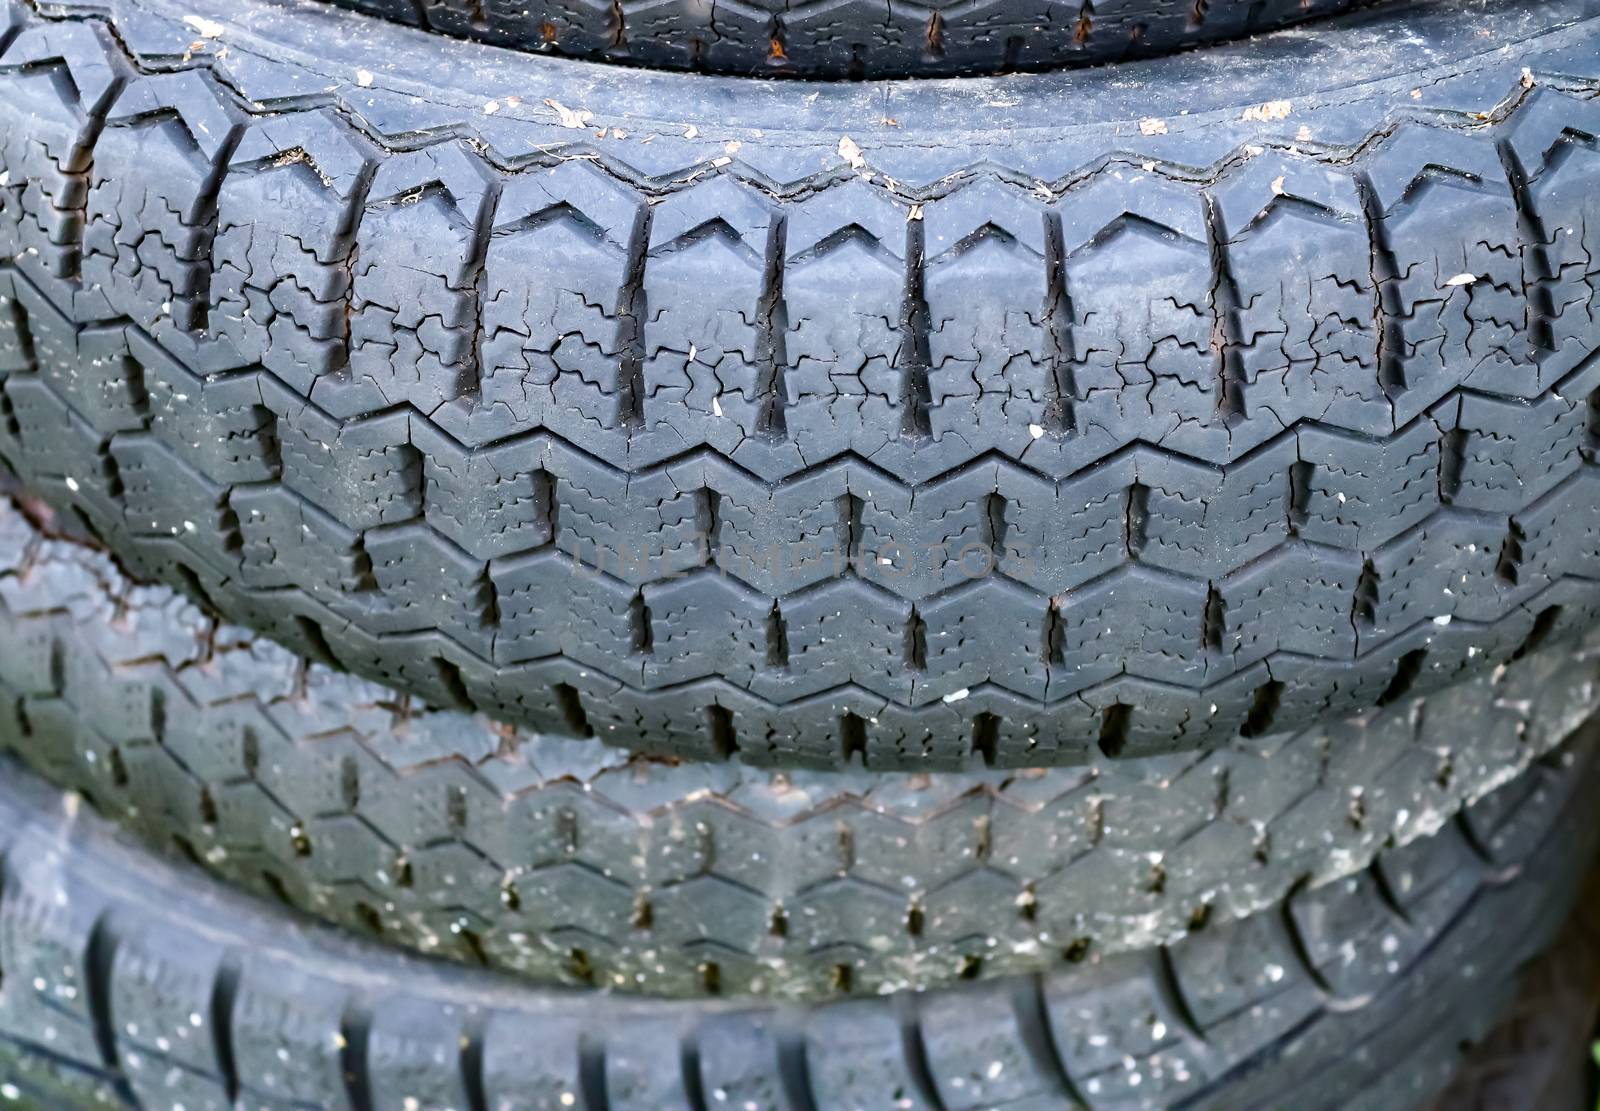 Damaged and worn old black tires on a stack. Tire tread problems. Solutions concept.